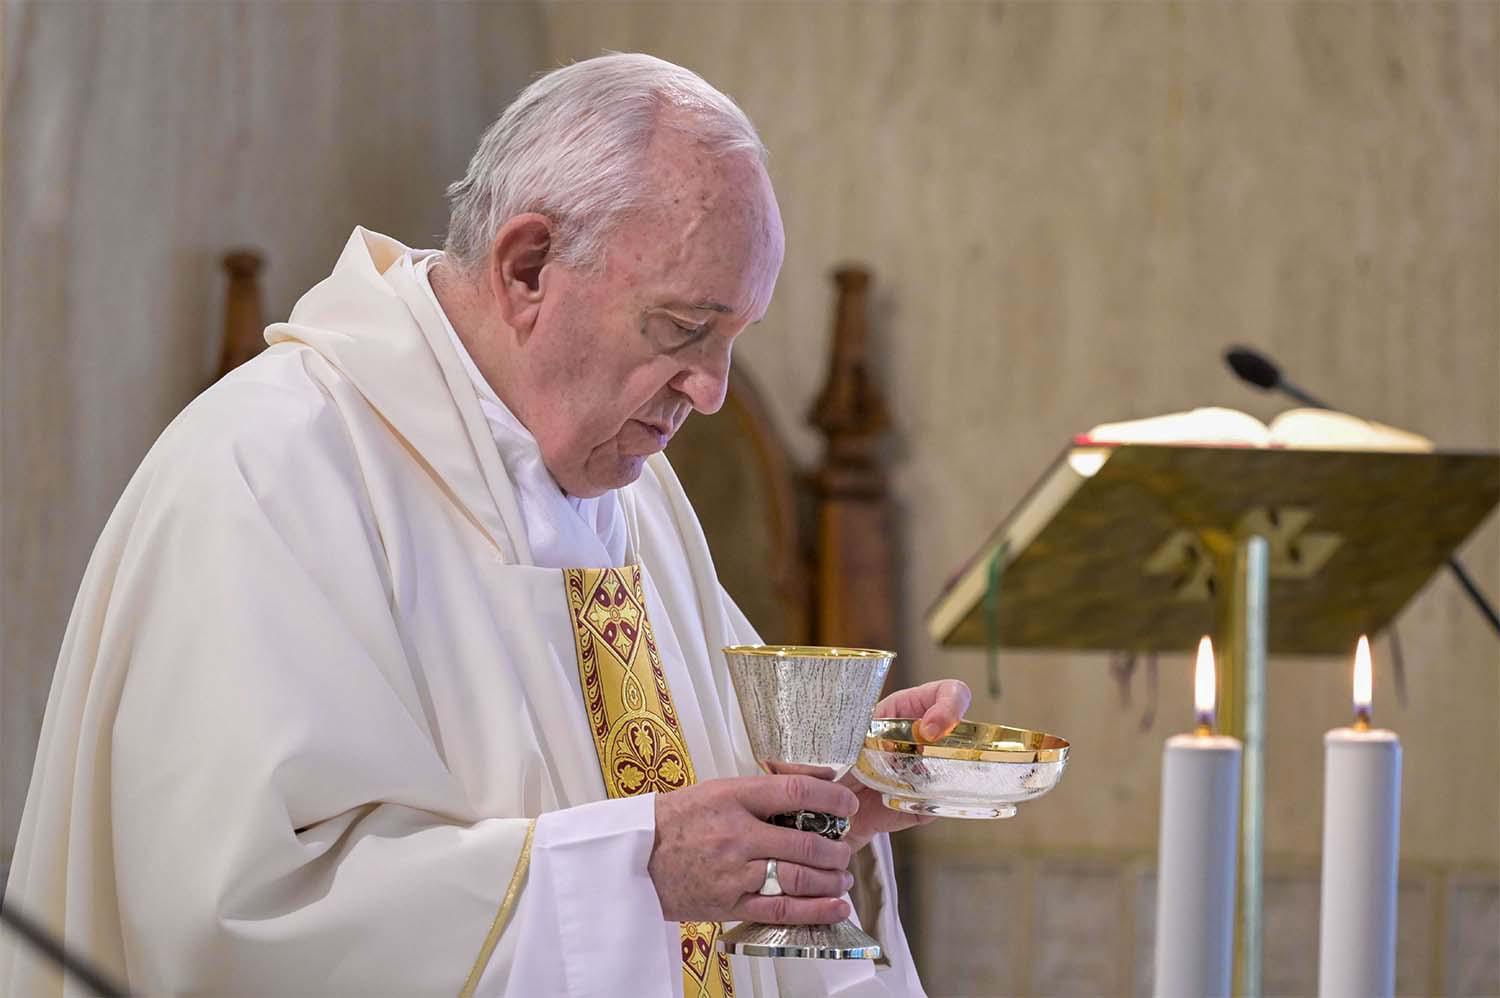 Pope Francis celebrating the Eucharist during a mass at the Santa Marta chapel in The Vatican